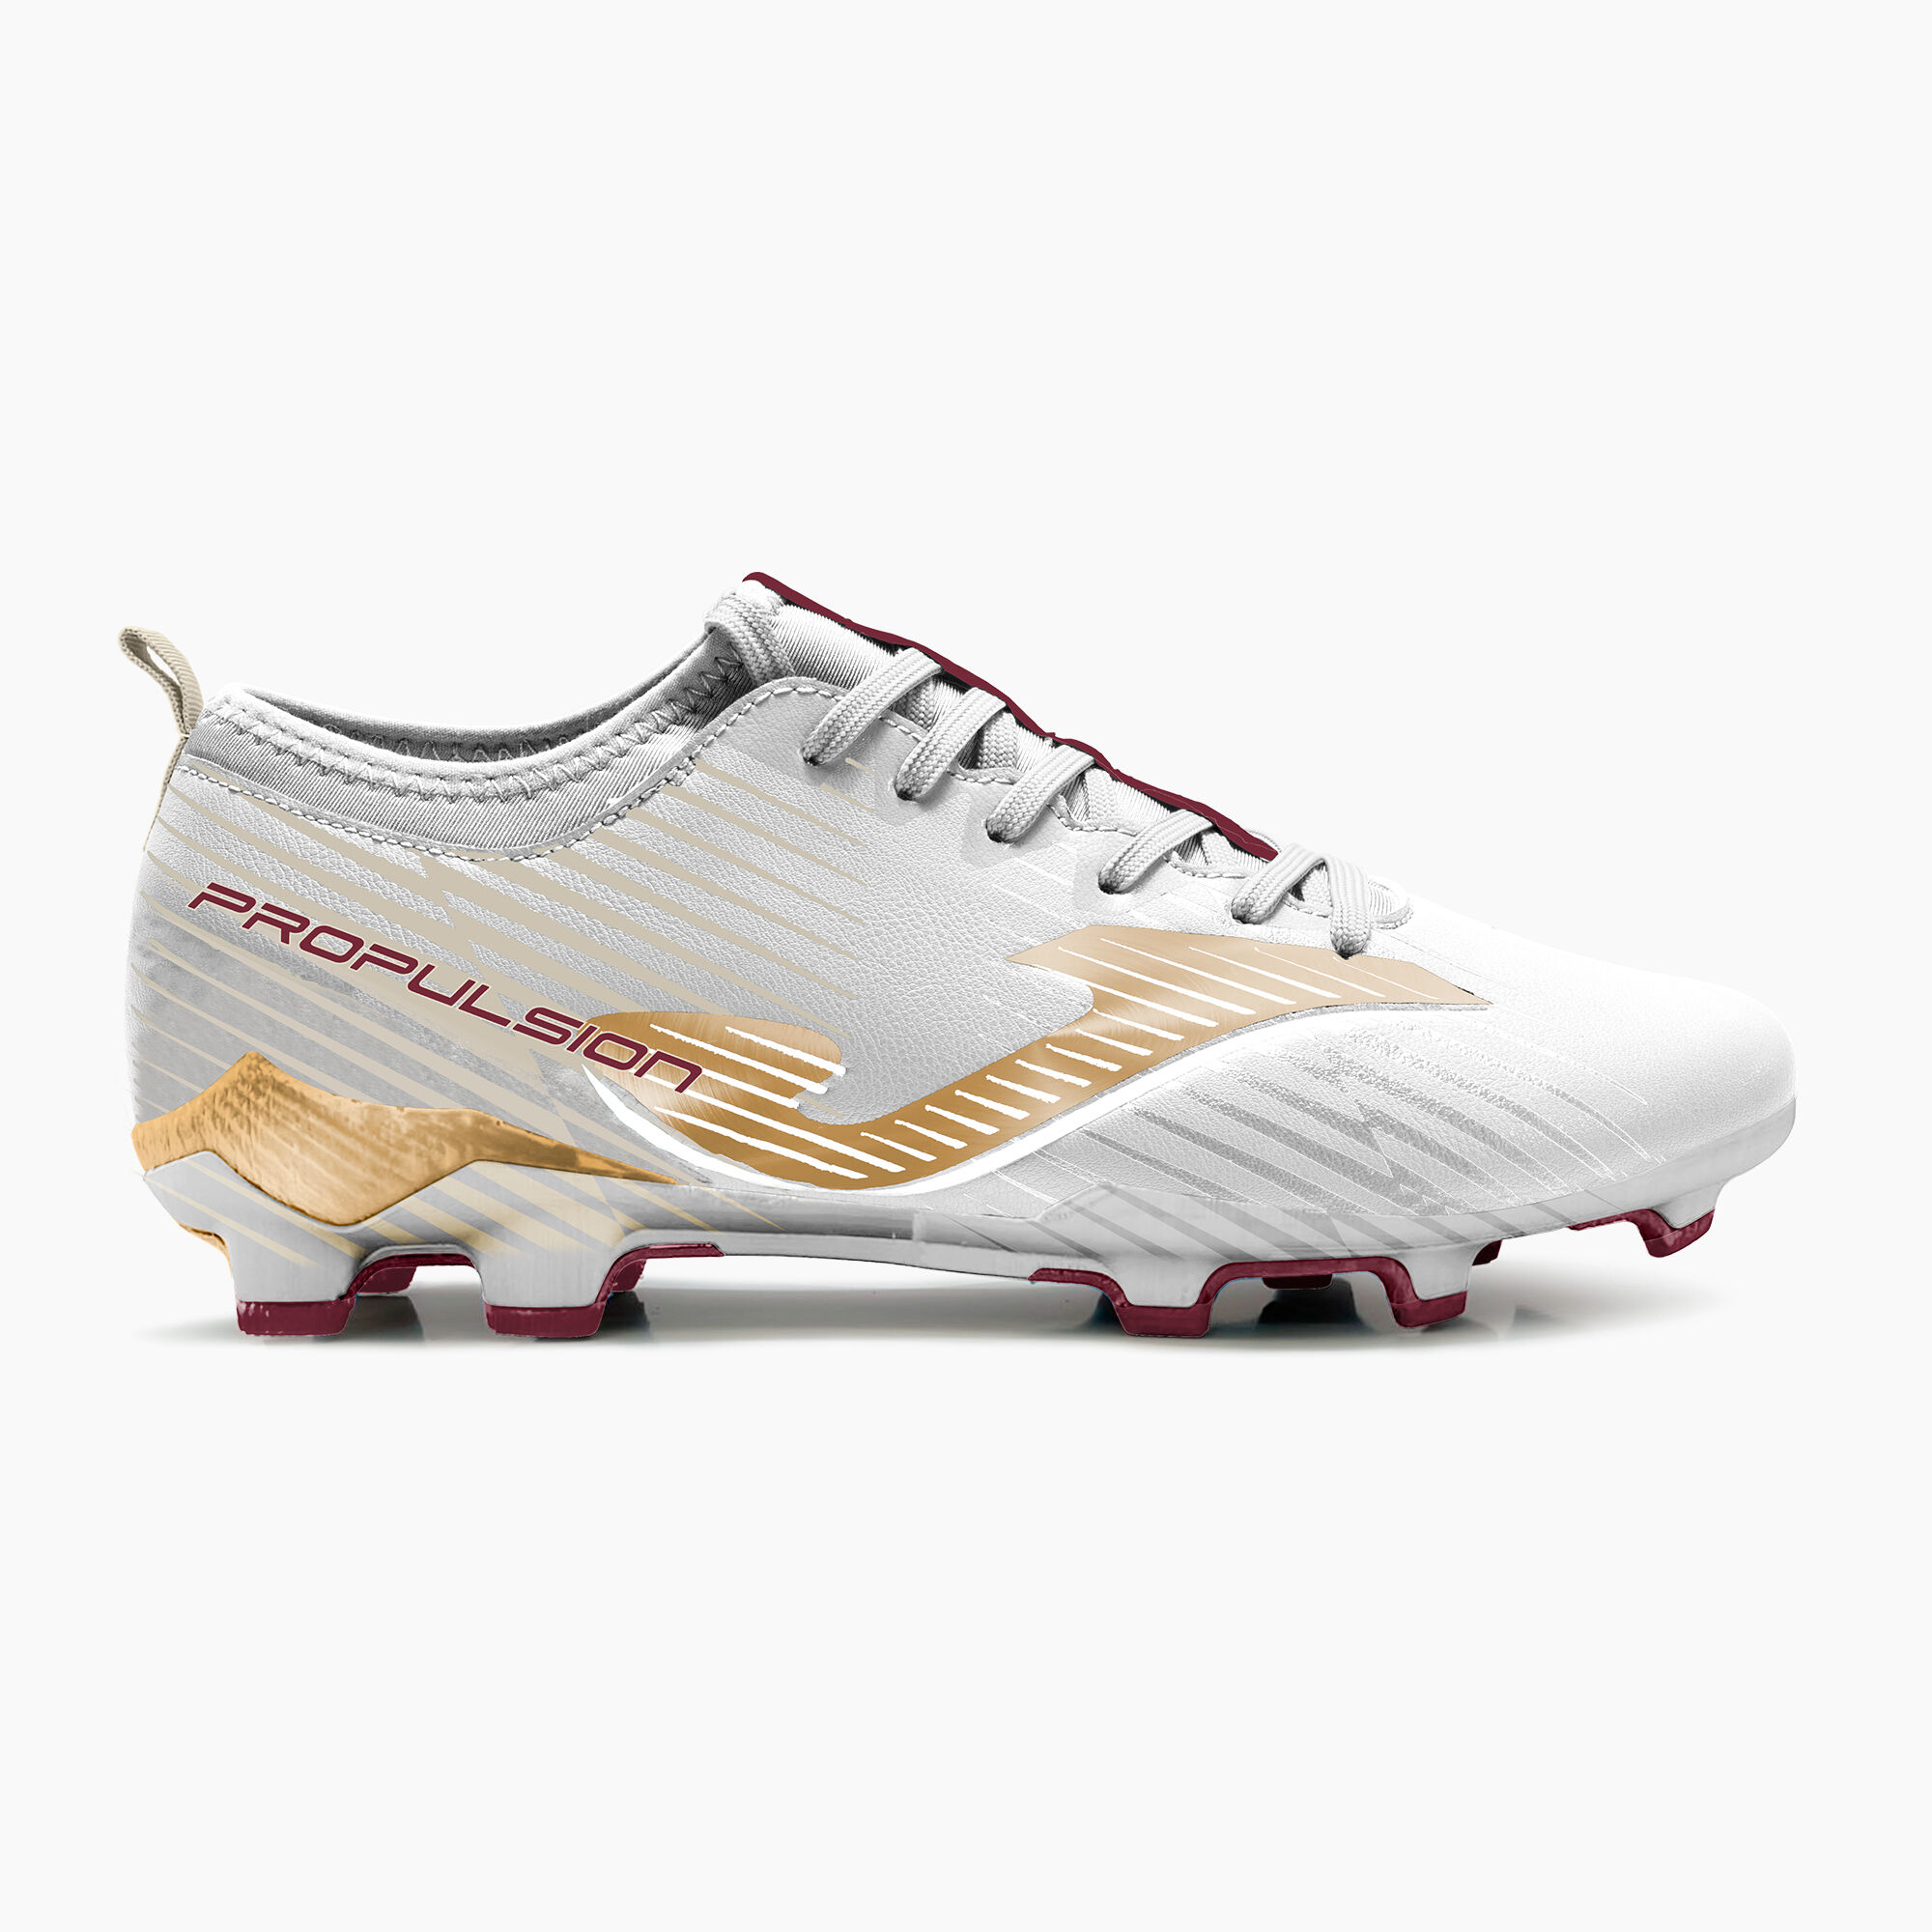 Football boots Propulsion Cup 24 firm ground FG white gold